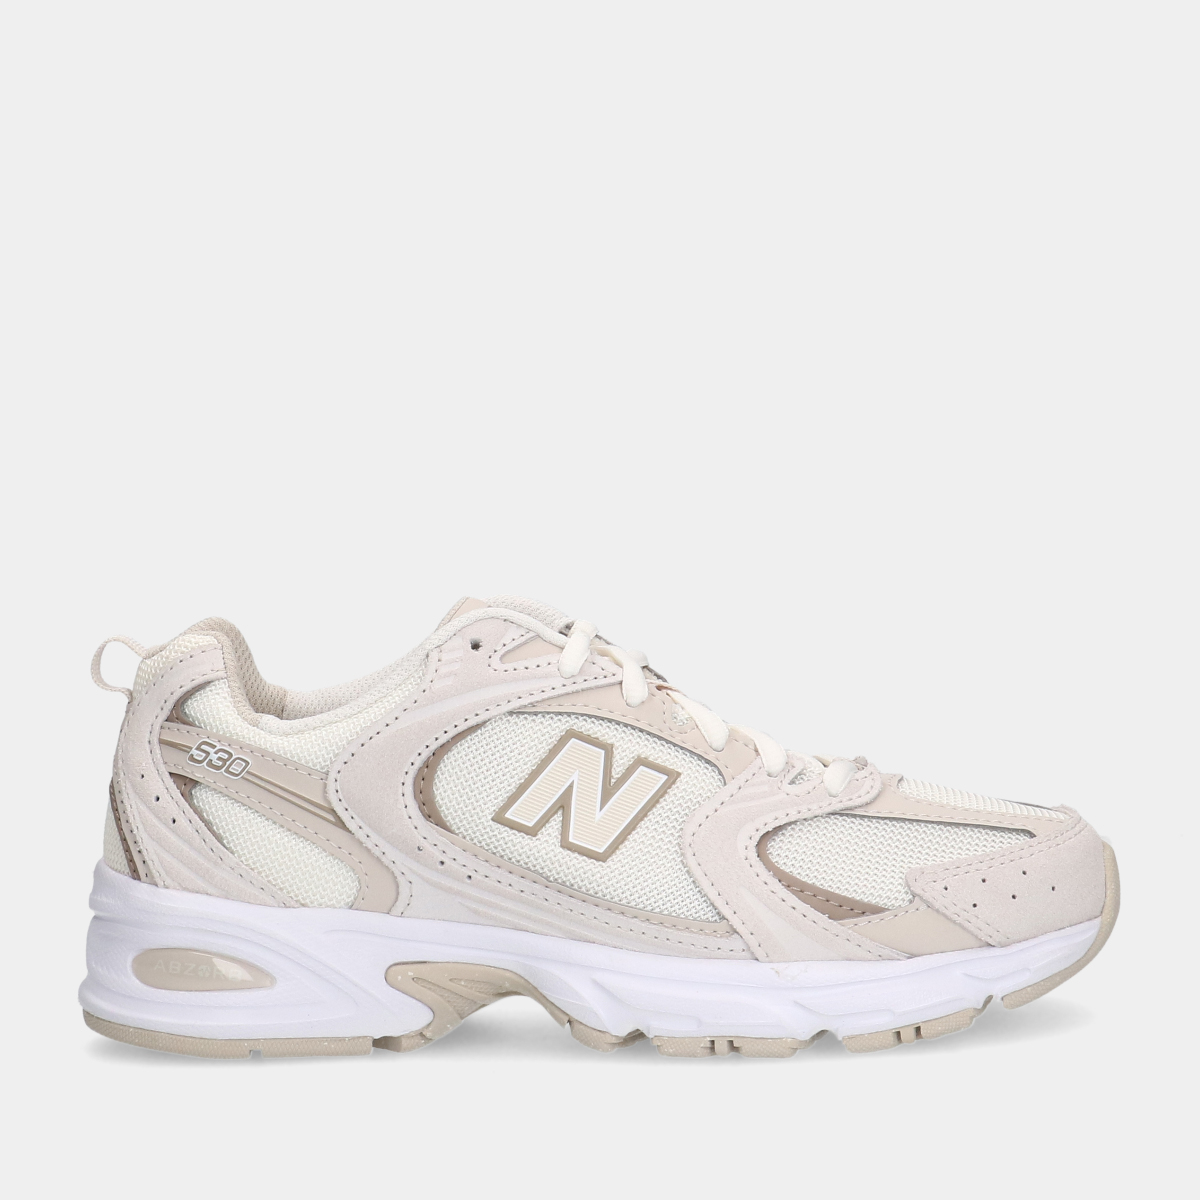 New Balance 530 White dames sneakers